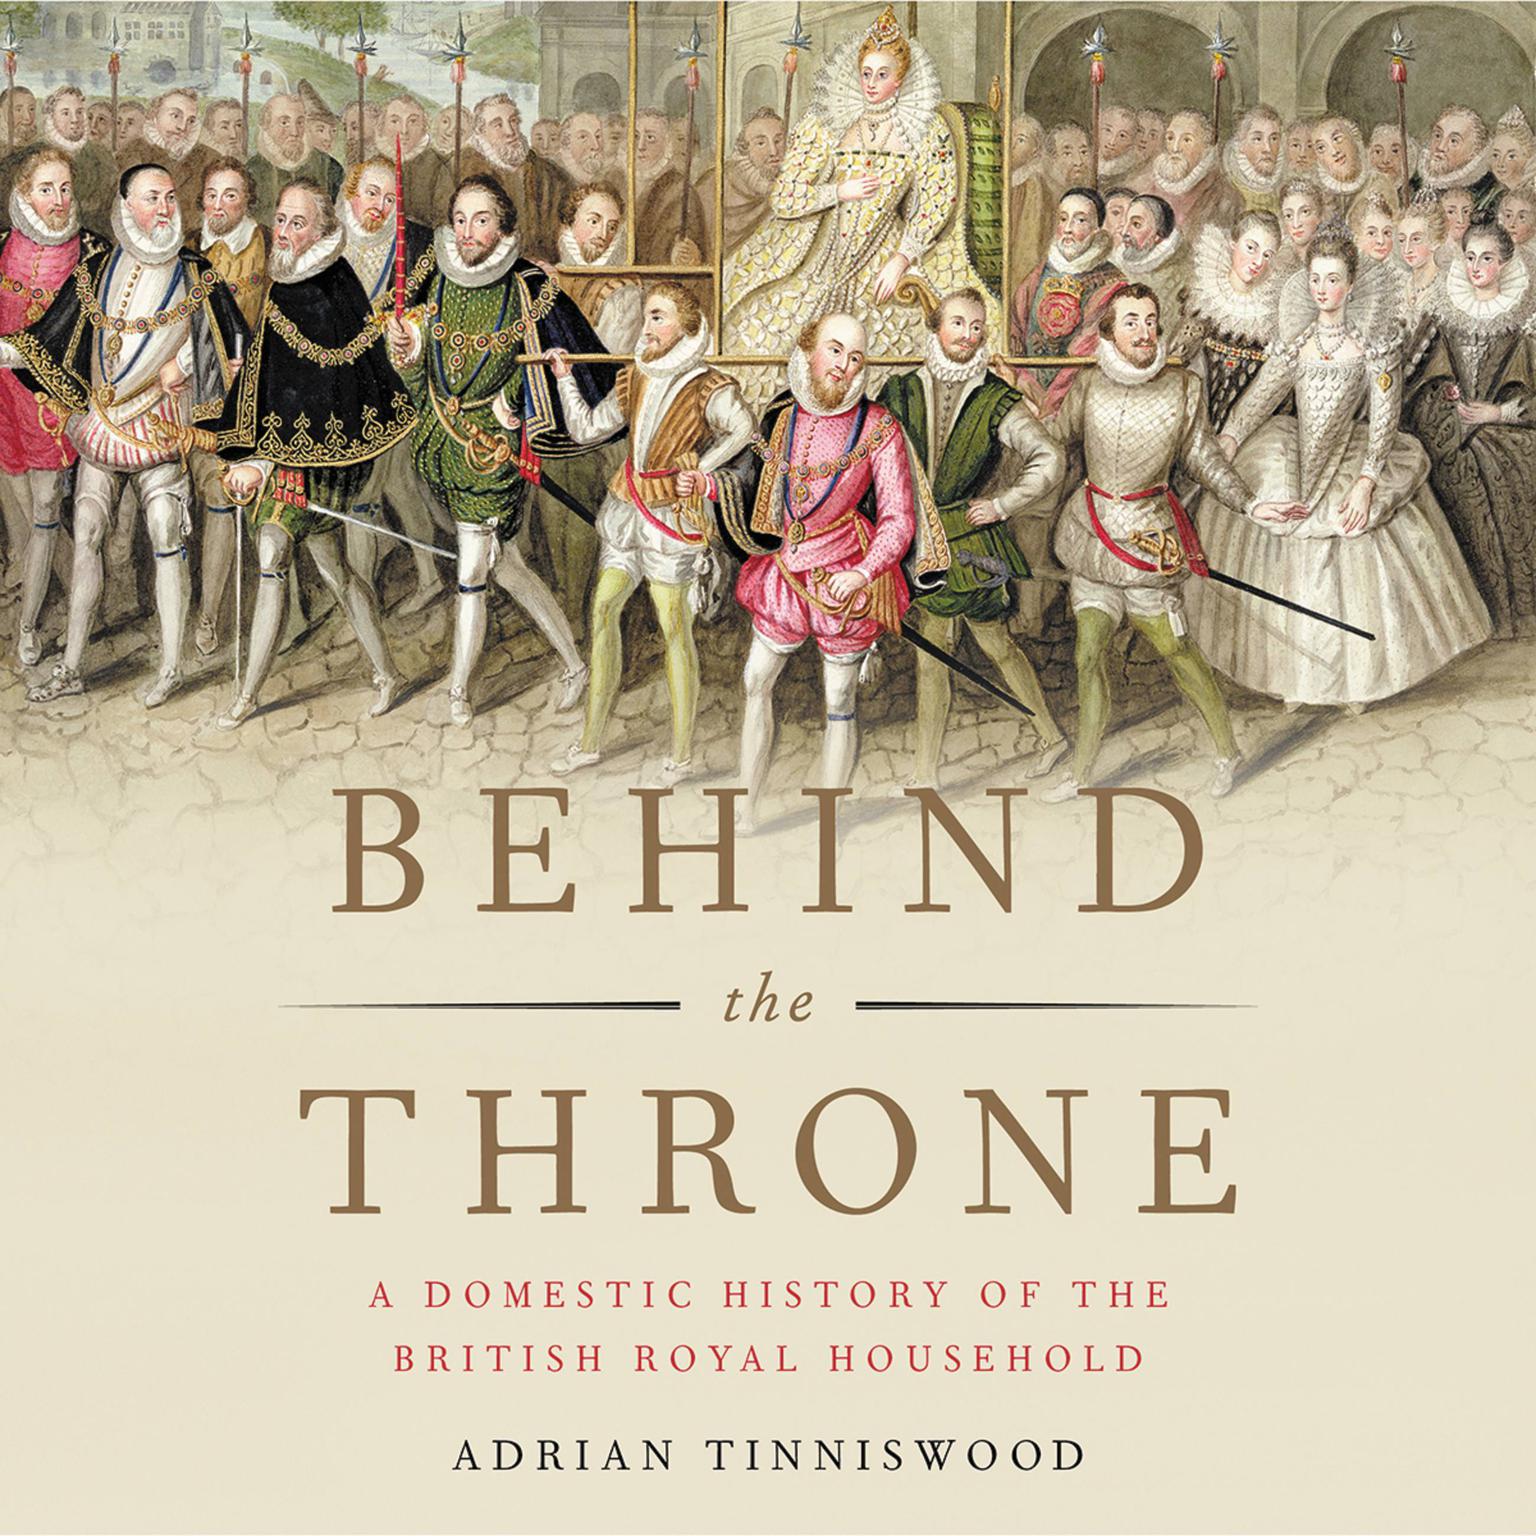 Behind the Throne: A Domestic History of the British Royal Household Audiobook, by Adrian Tinniswood